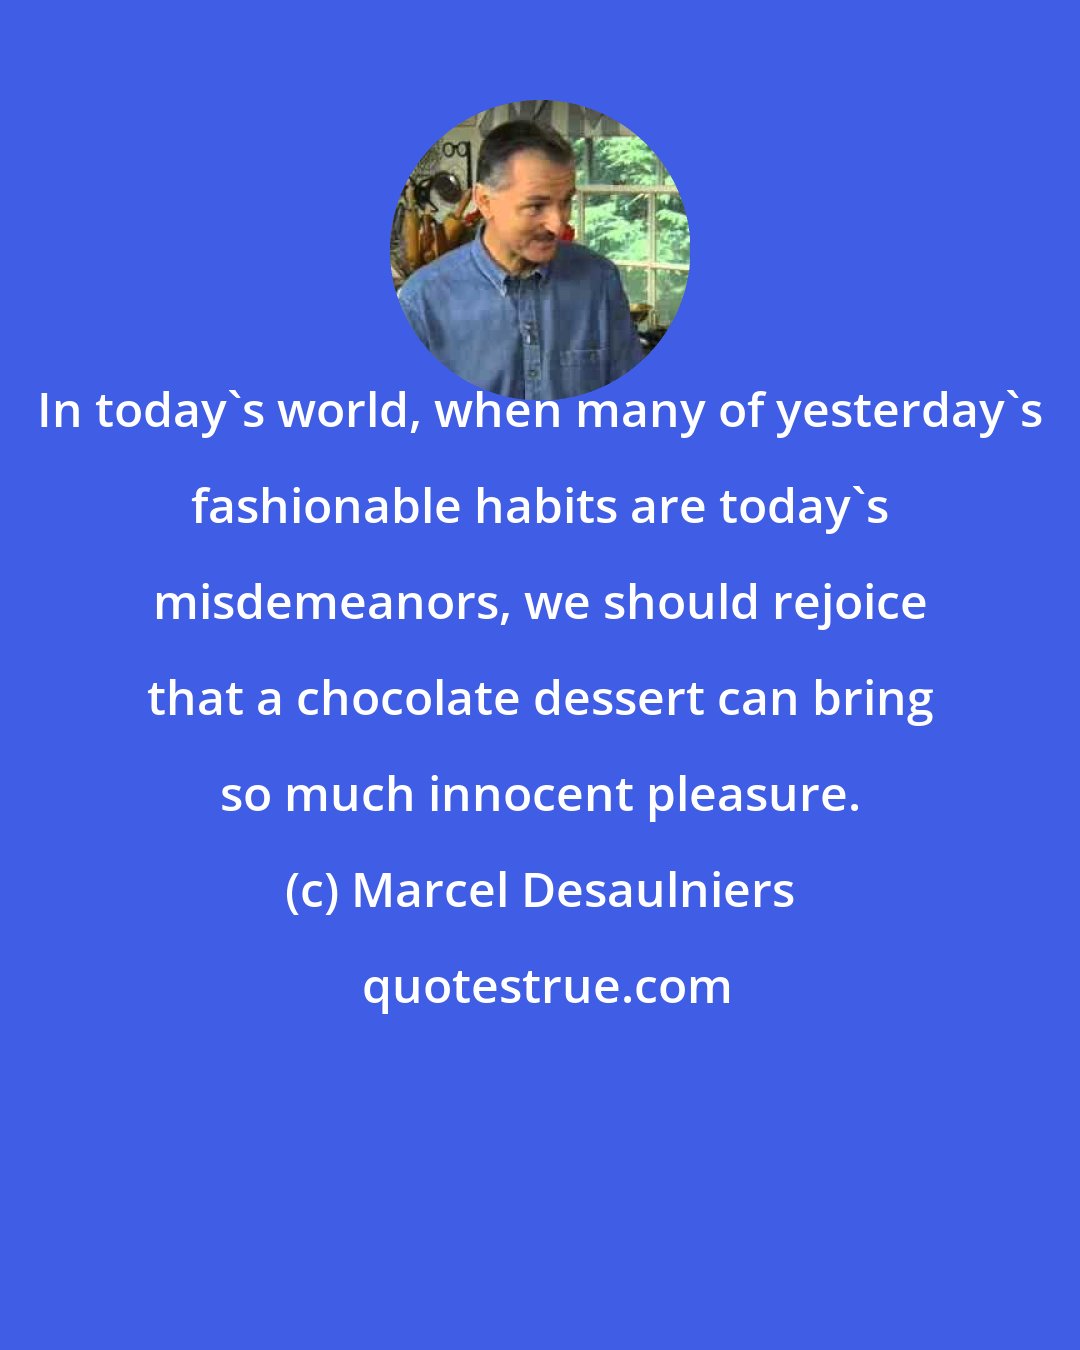 Marcel Desaulniers: In today's world, when many of yesterday's fashionable habits are today's misdemeanors, we should rejoice that a chocolate dessert can bring so much innocent pleasure.